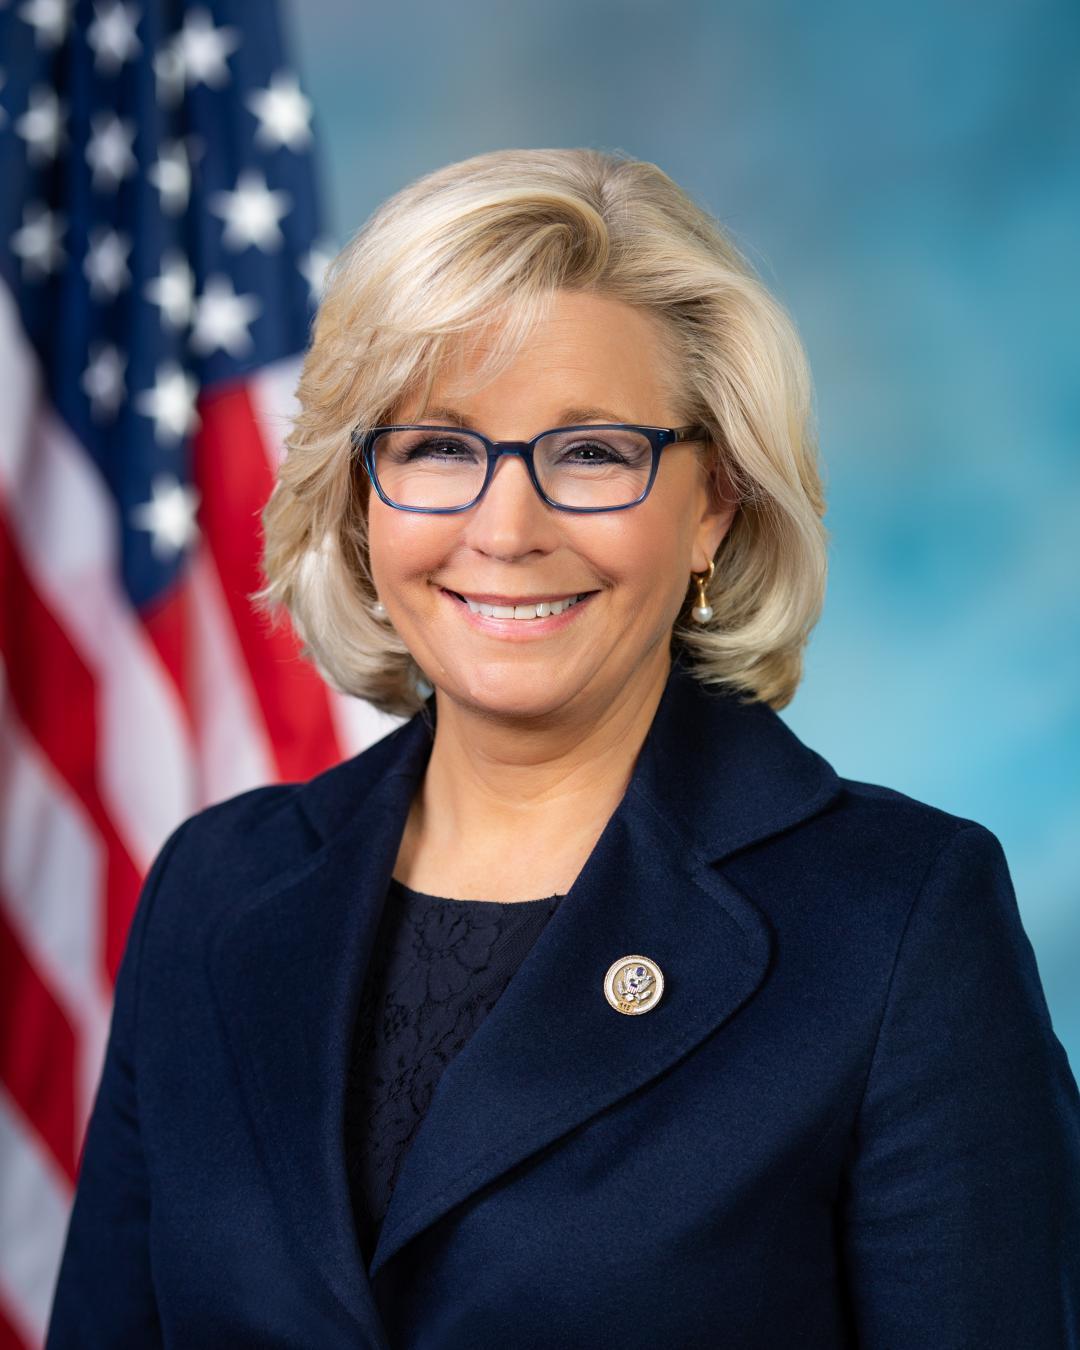 Liz Cheney Personifies D.C. Sewer